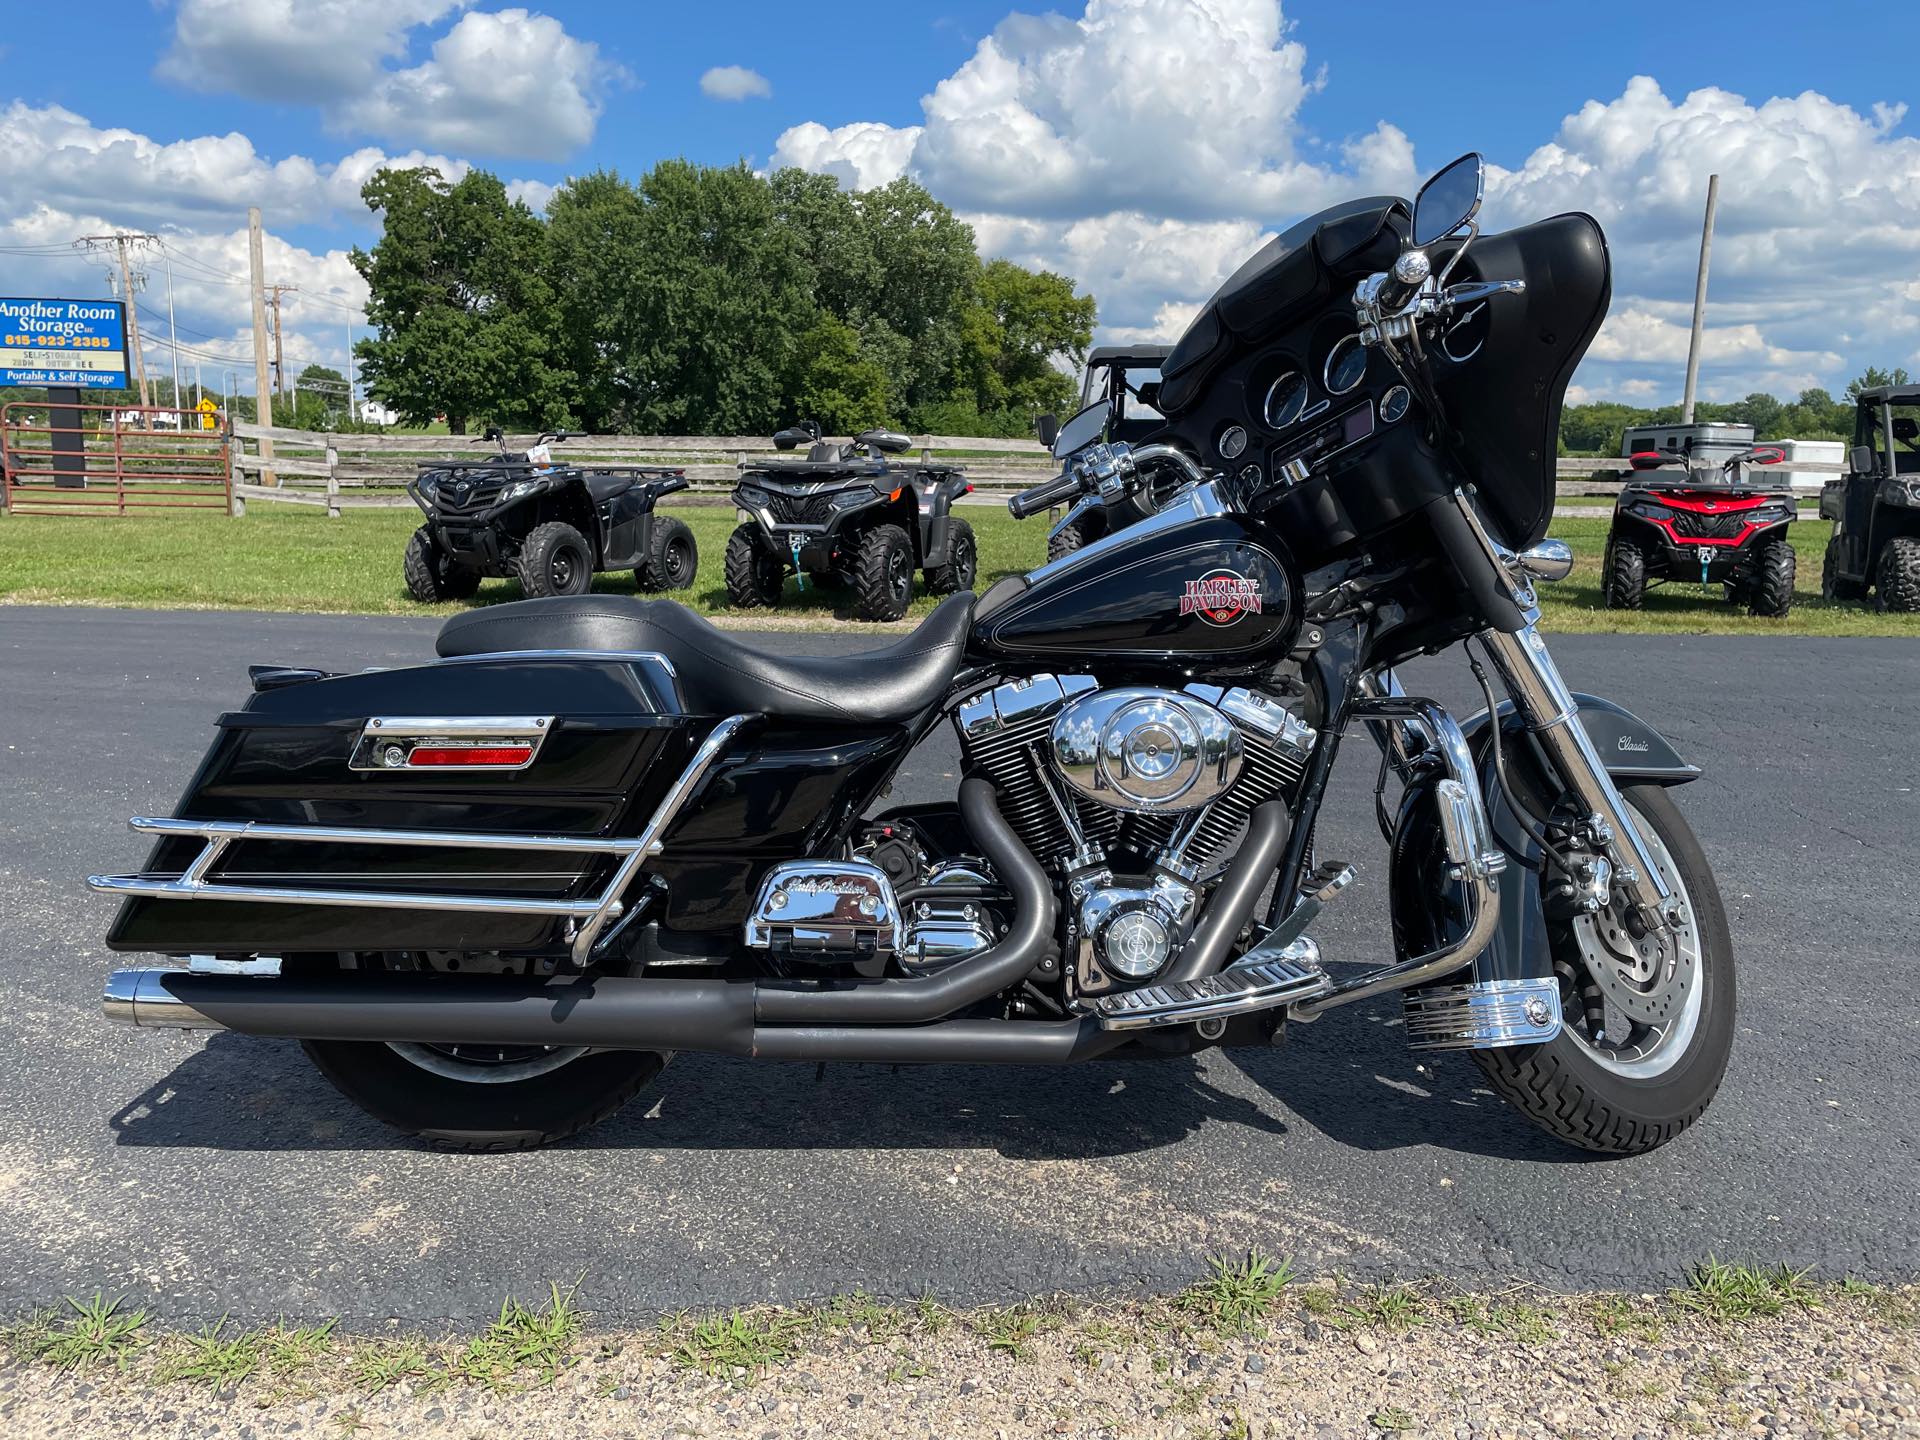 2004 Harley-Davidson Electra Glide Classic at Randy's Cycle